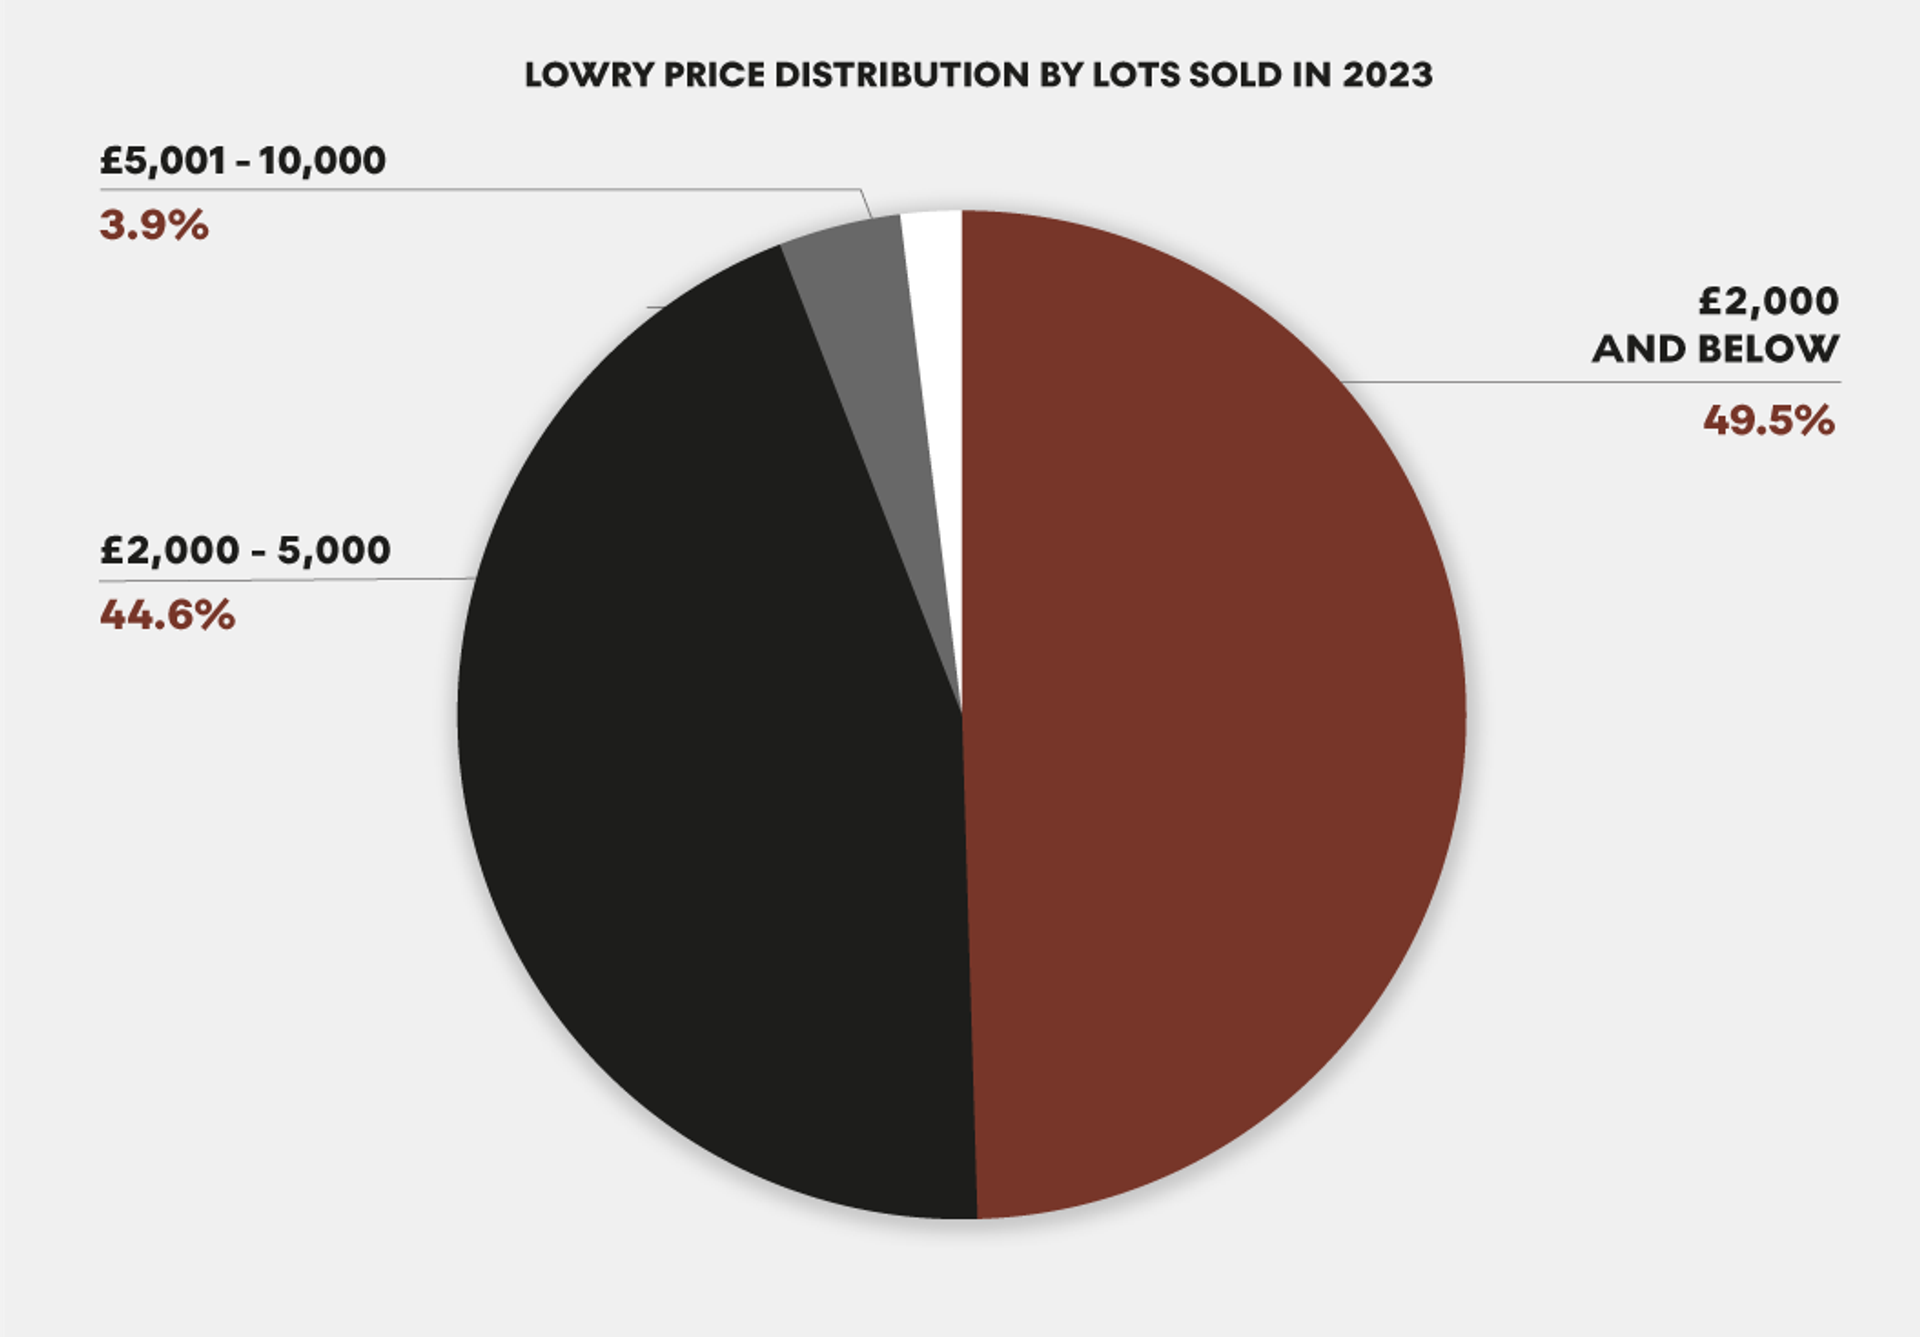 Pie chart showing the price distribution of LS Lowry's print market in 2023. 